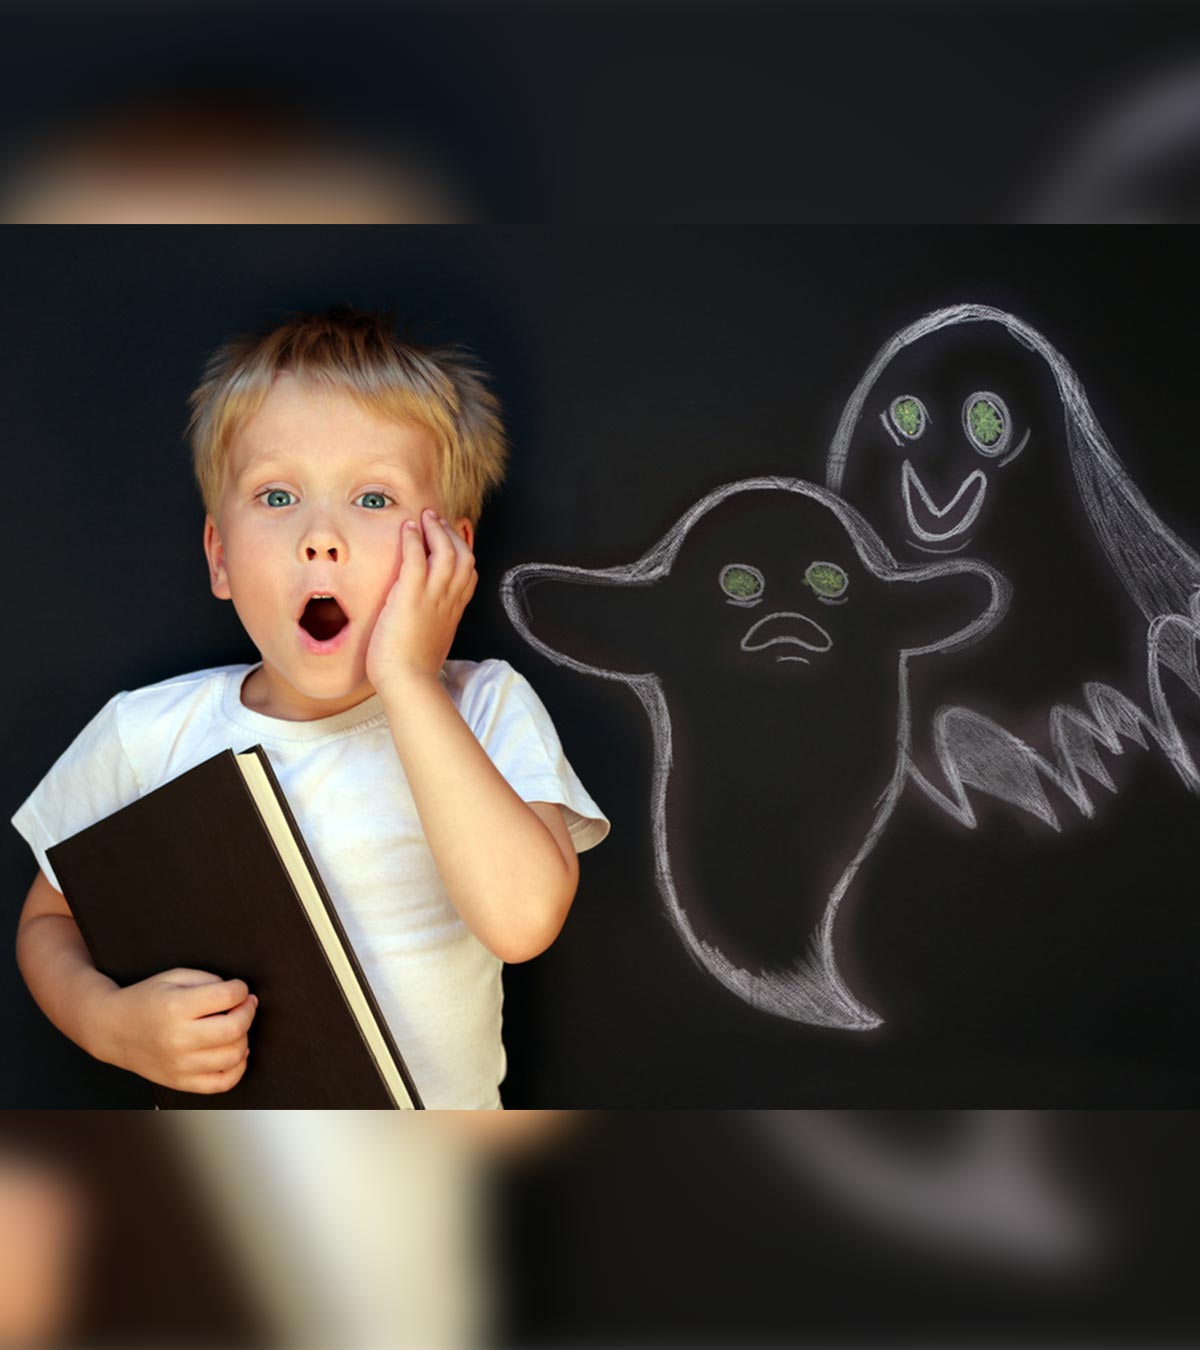 20 Short And Scary Ghost Stories For Kids